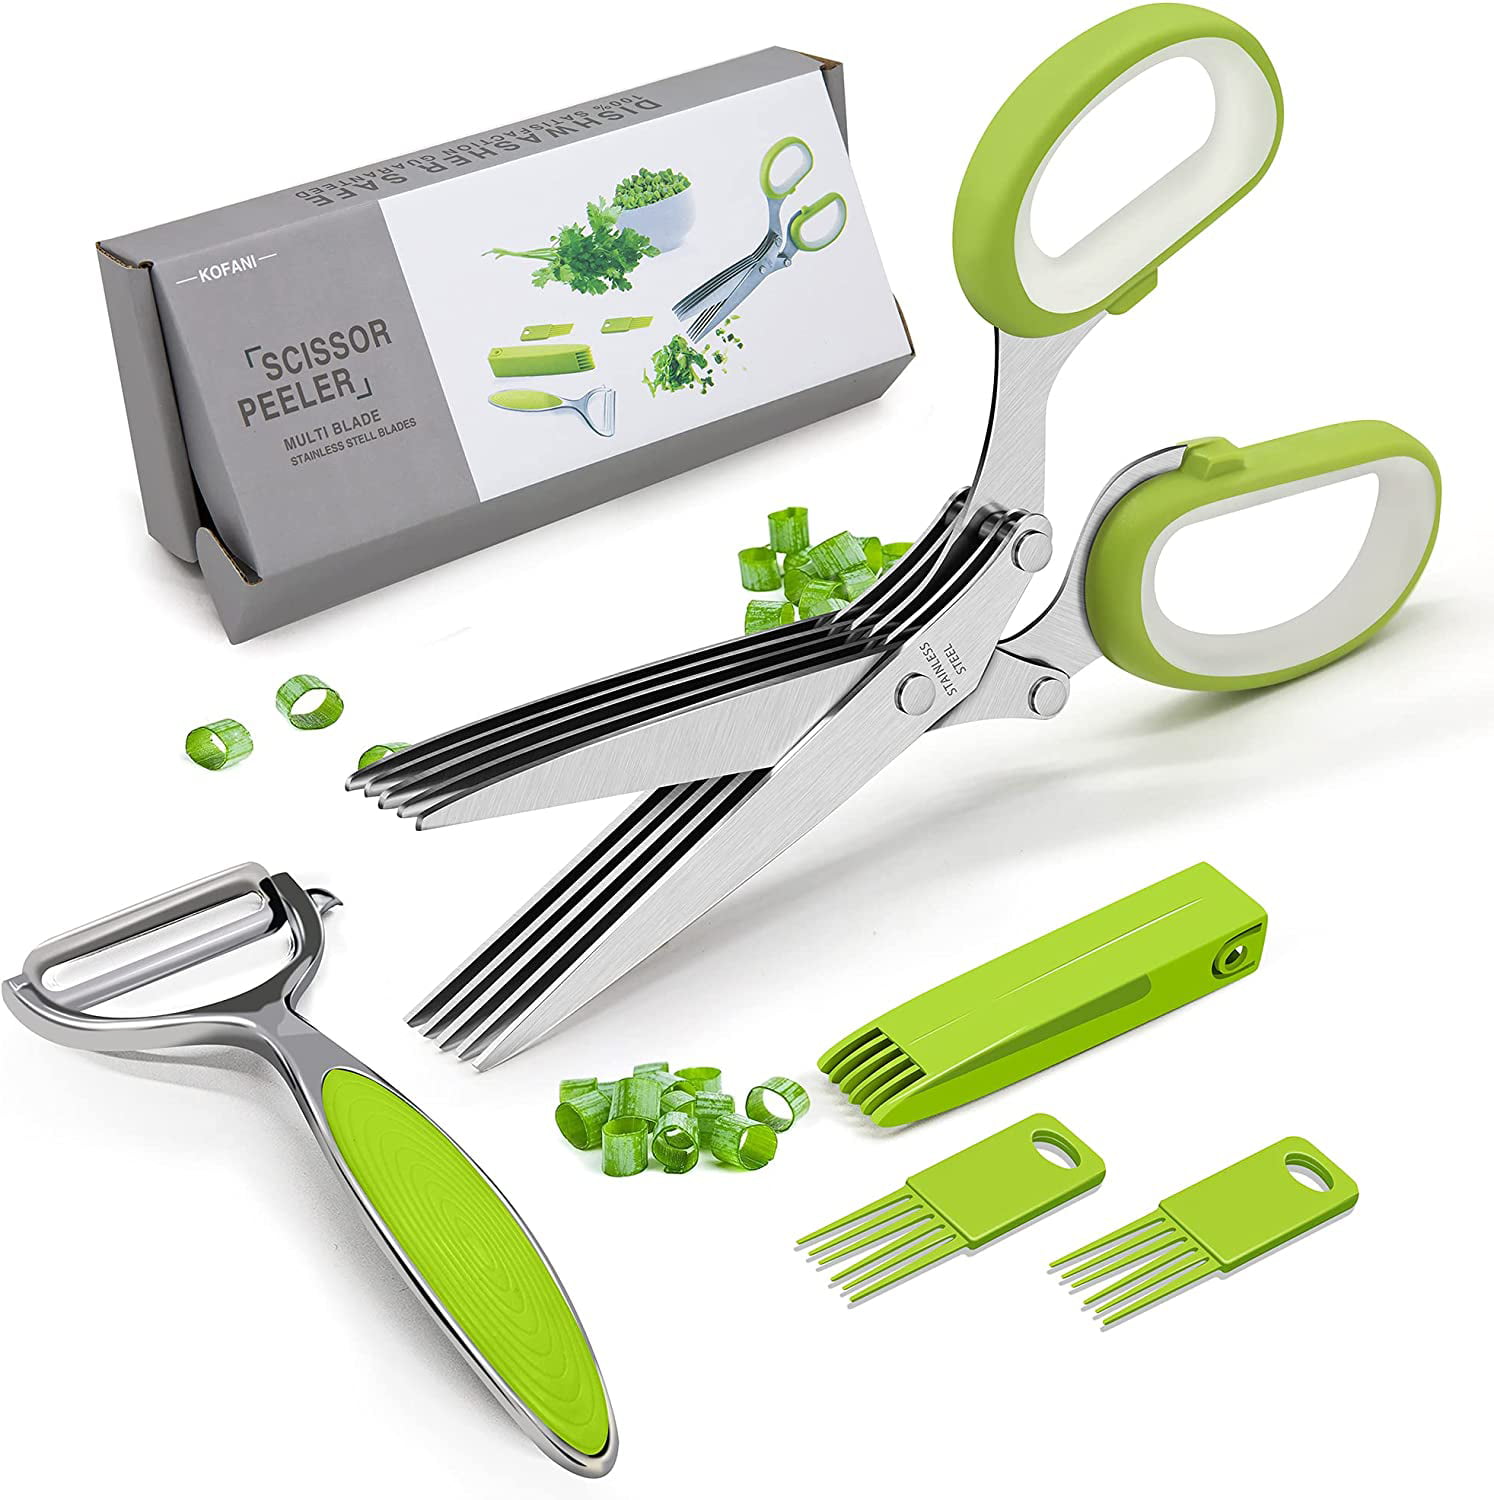 NEW D.LINE STAINLESS STEEL PARSLEY MINT CUTTER KITCHEN UTENSILS FOOD SHAPERS 